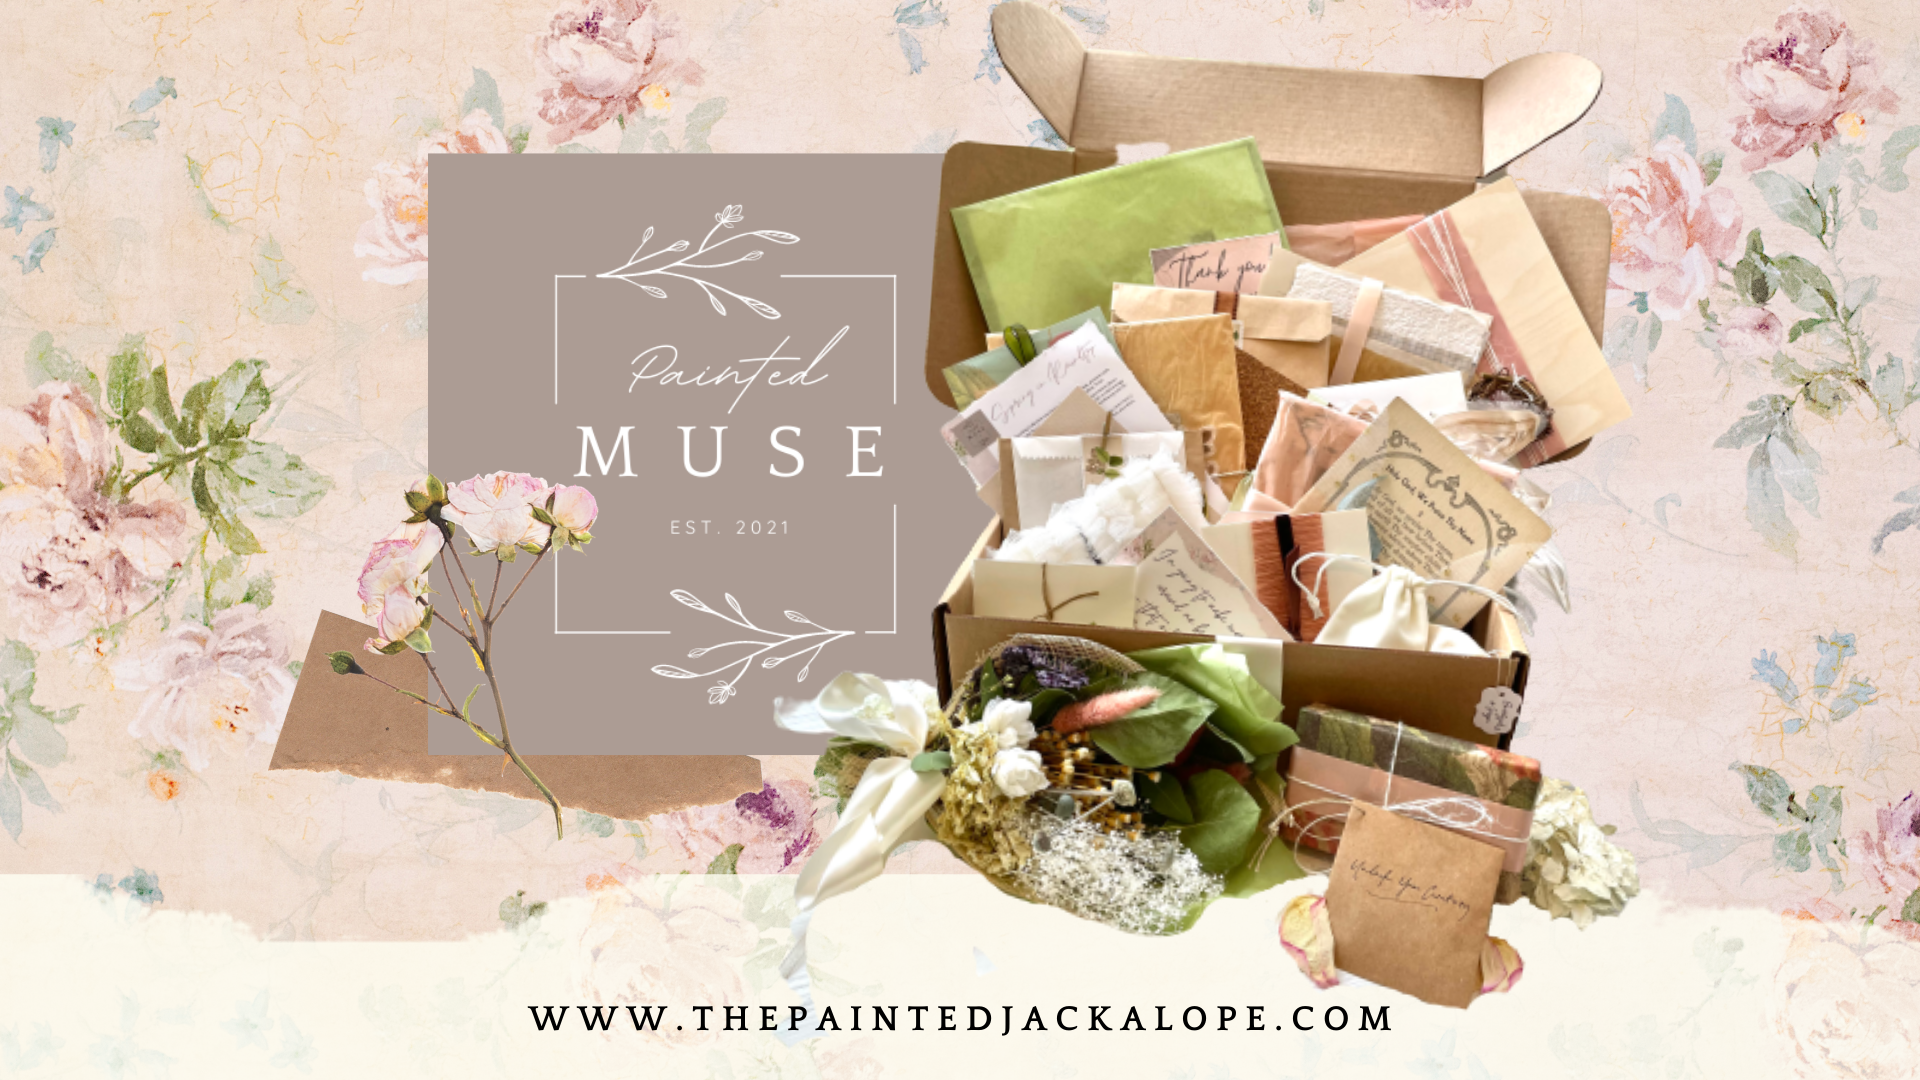 Painted Muse Tiffany Foster Smith vintage subscription